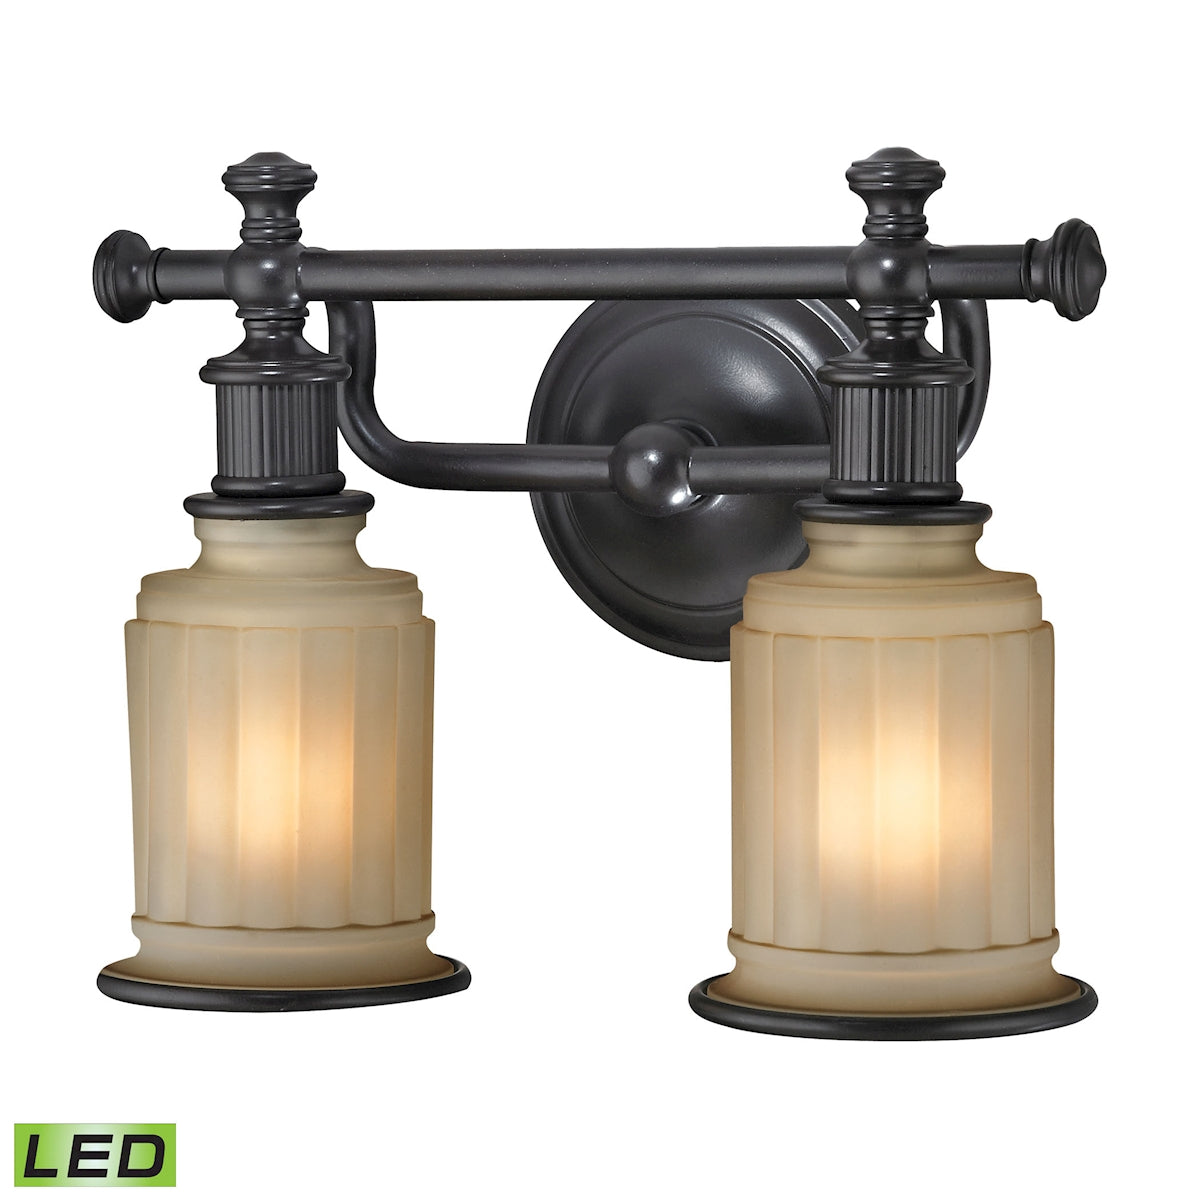 ELK Lighting 52011/2-LED Acadia 2-Light Vanity Lamp in Oiled Bronze with Opal Reeded Pressed Glass - Includes LED Bulbs